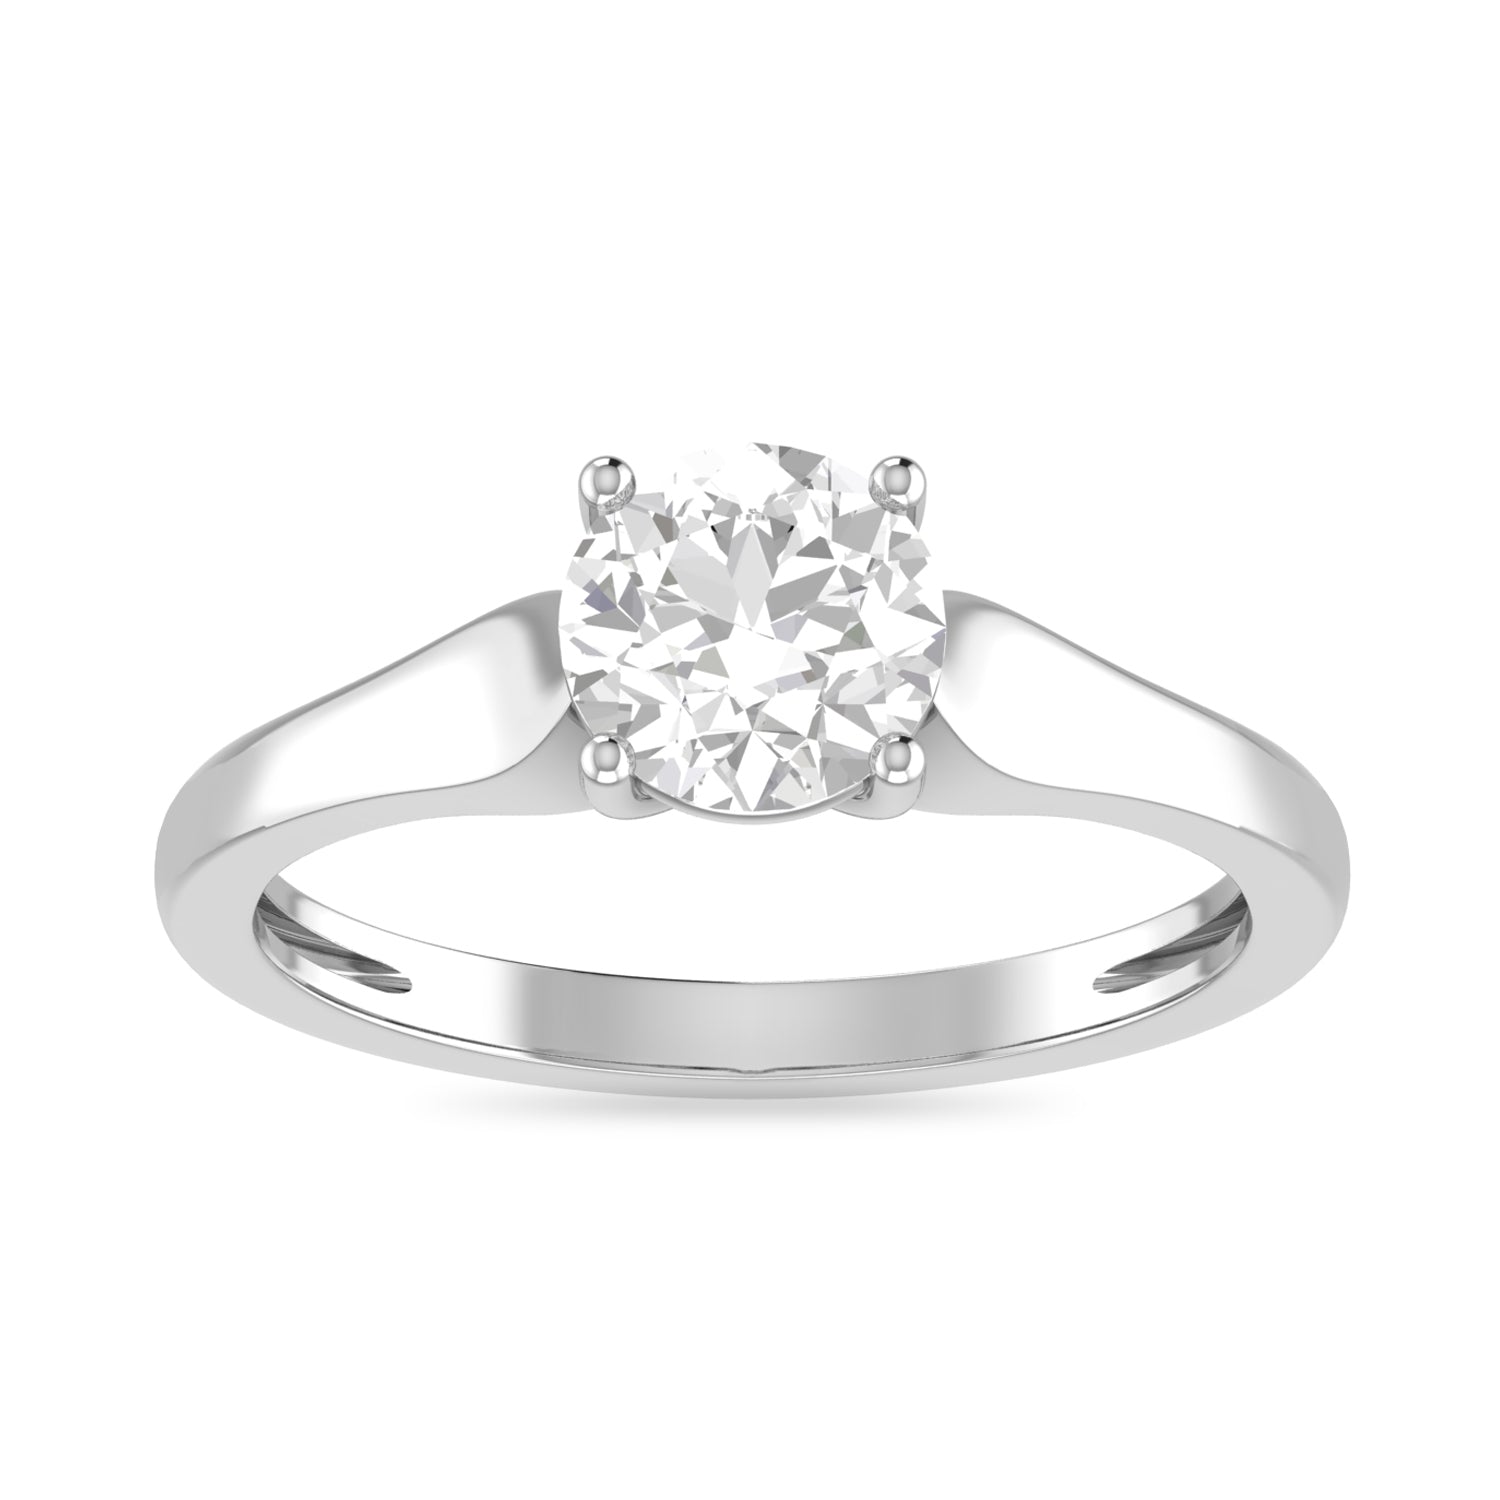 White Gold Solitaire Engagement Ring 24kdiamond